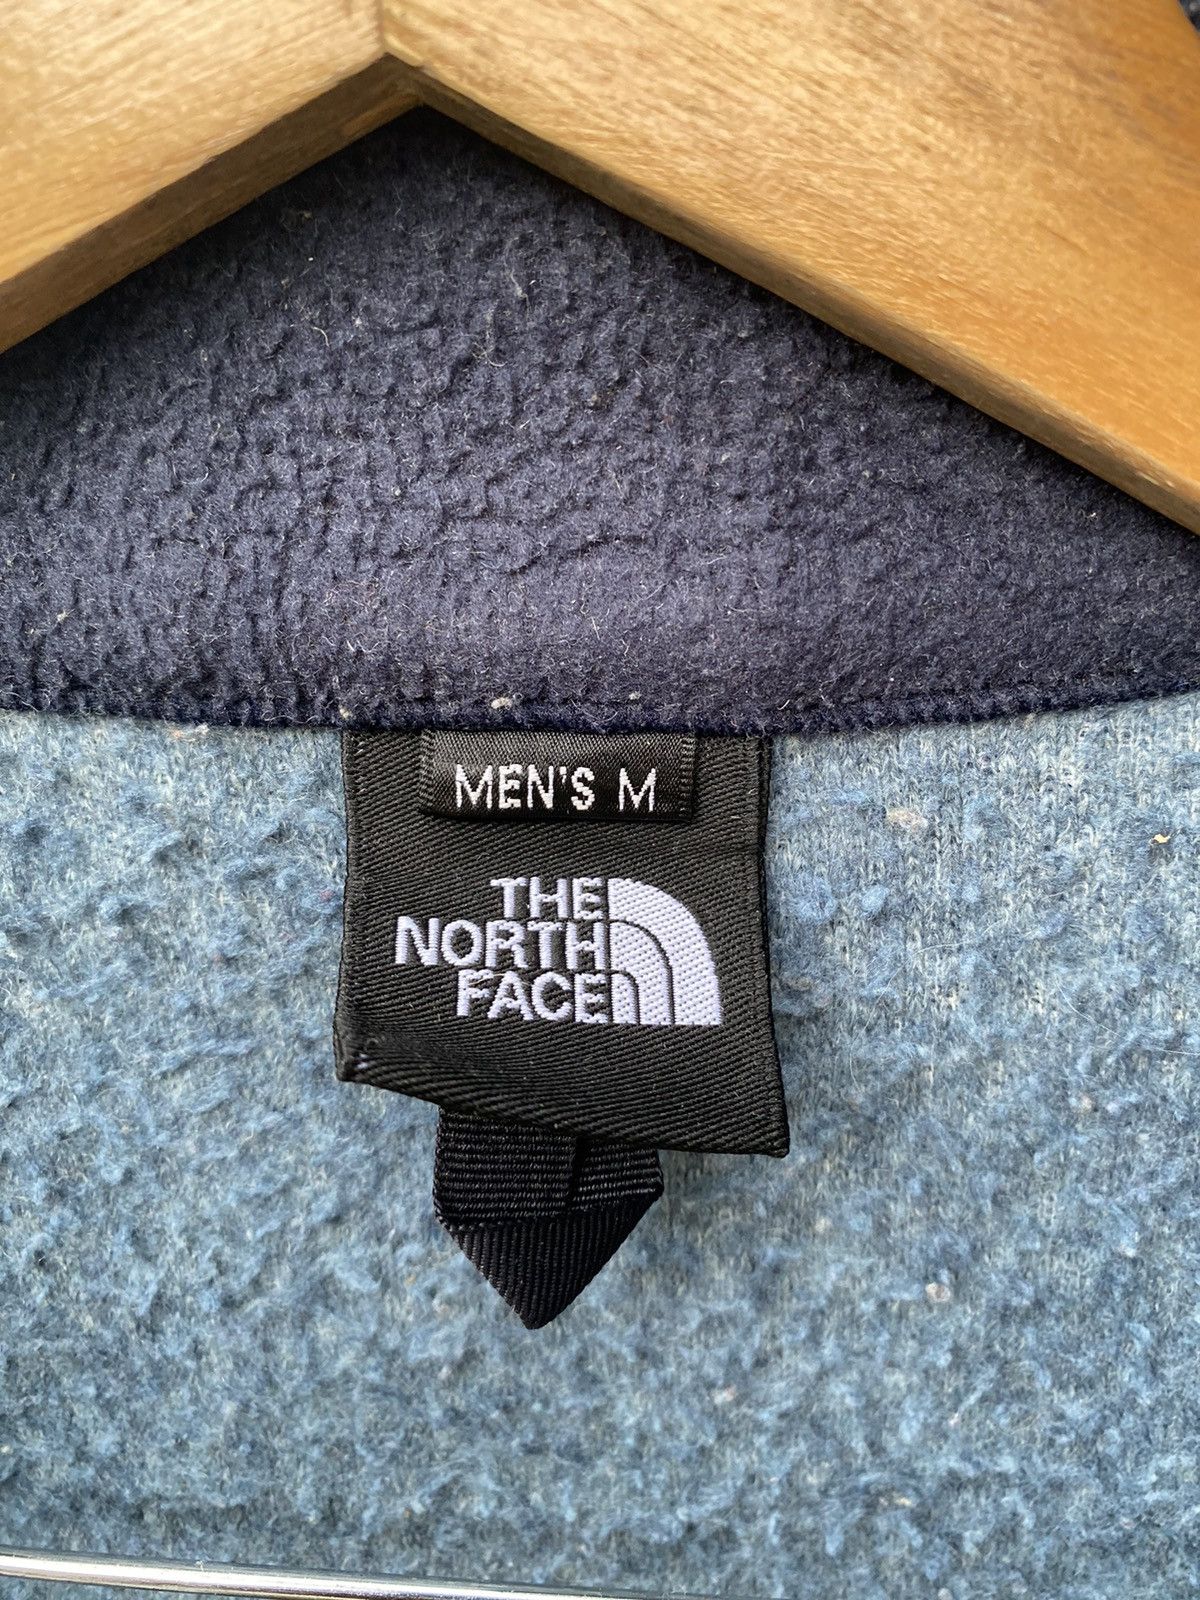 The North Face Sherpa Fleece Jacket - 7